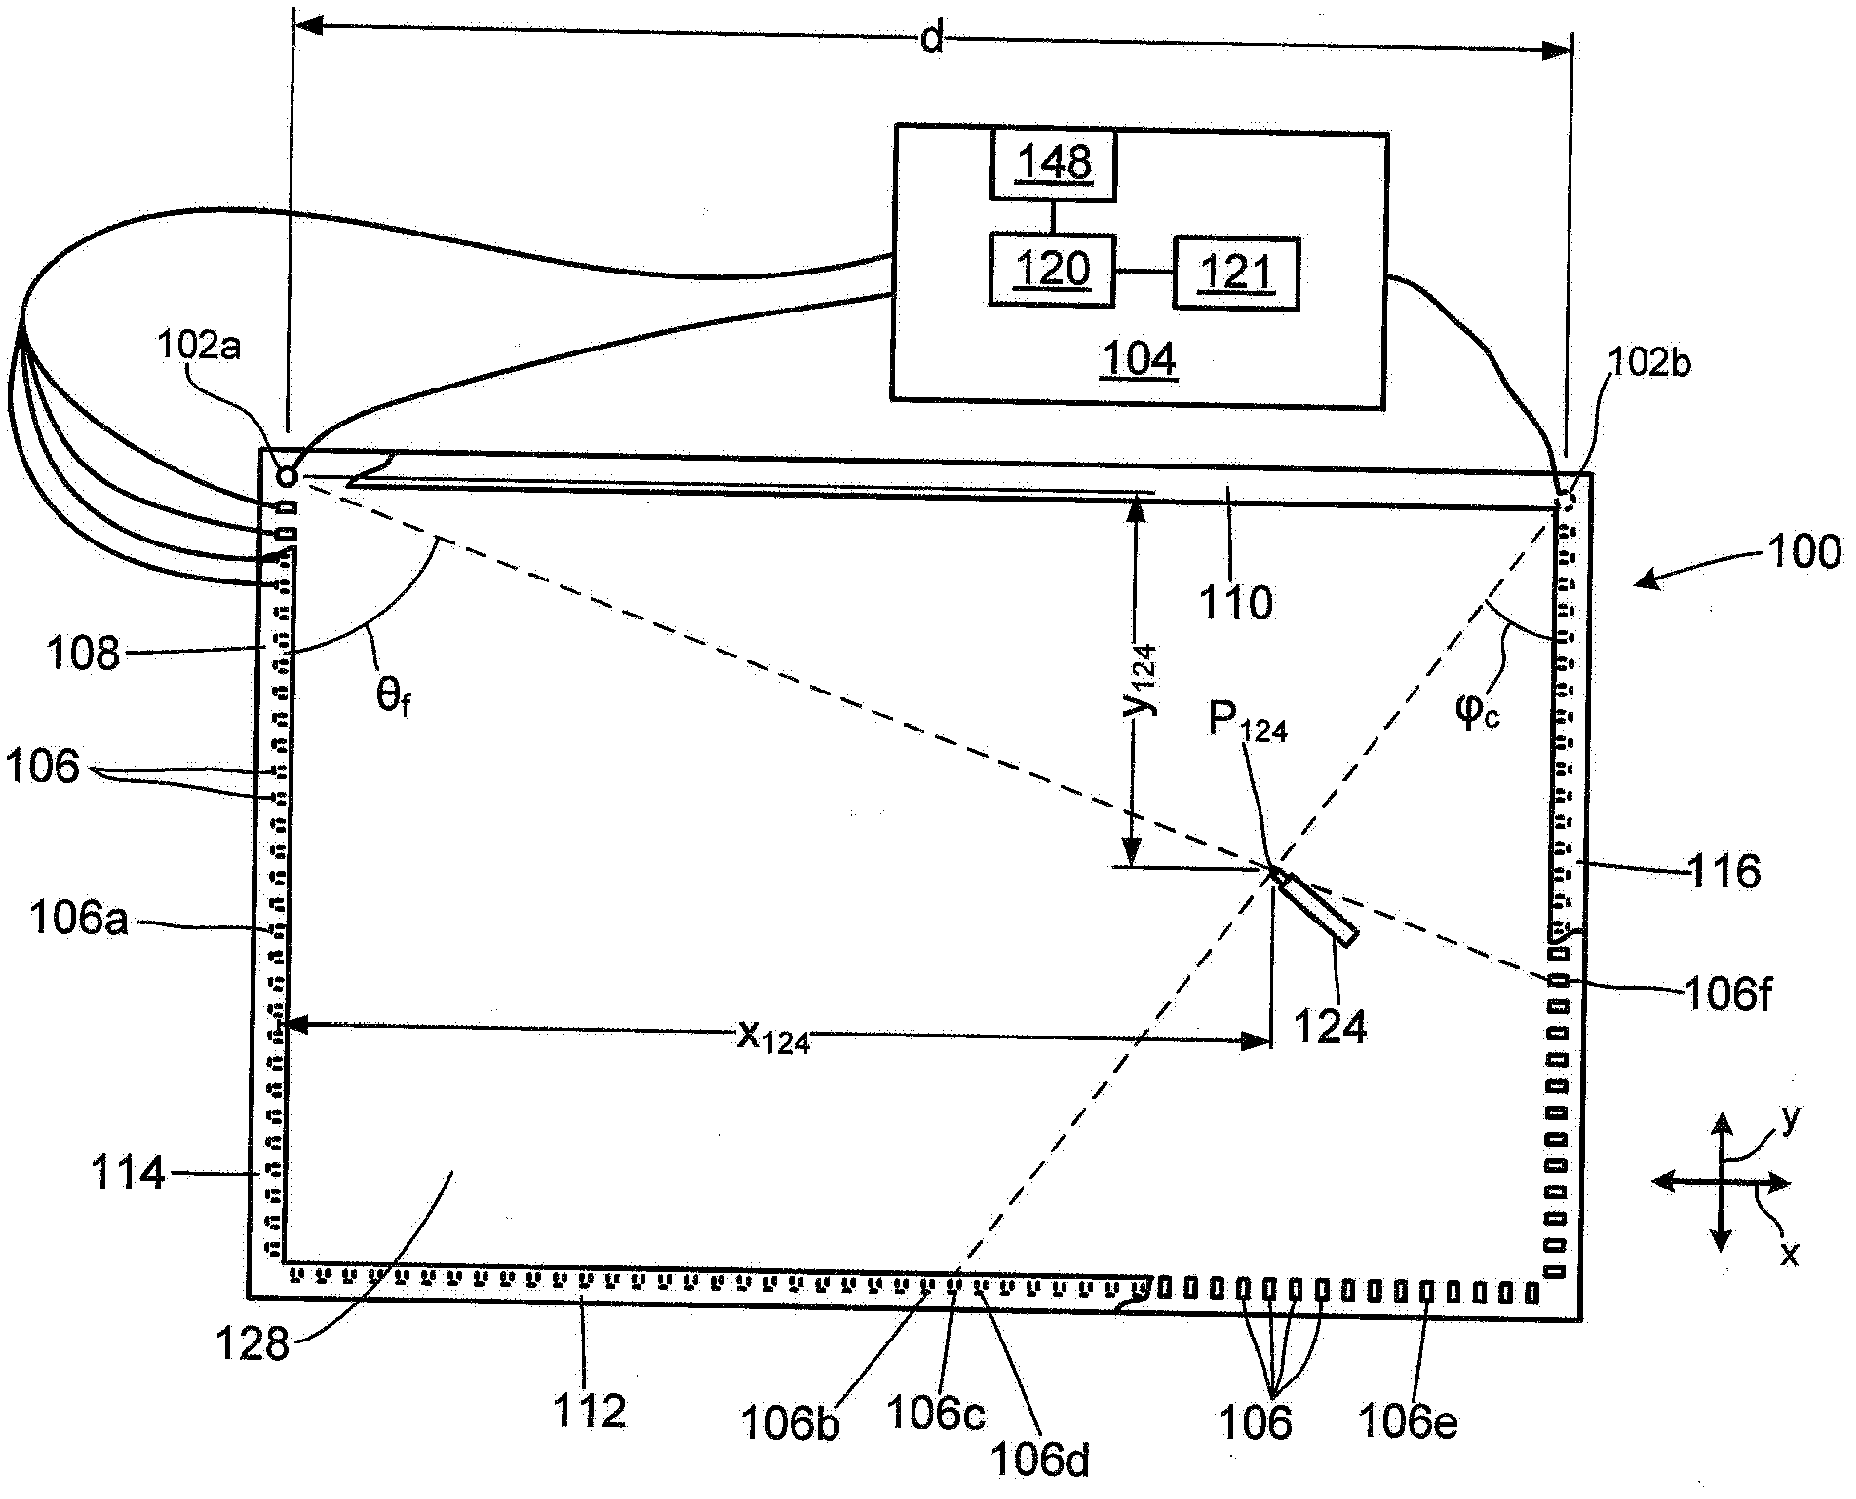 Systems and methods for sensing and tracking radiation blocking objects on a surface